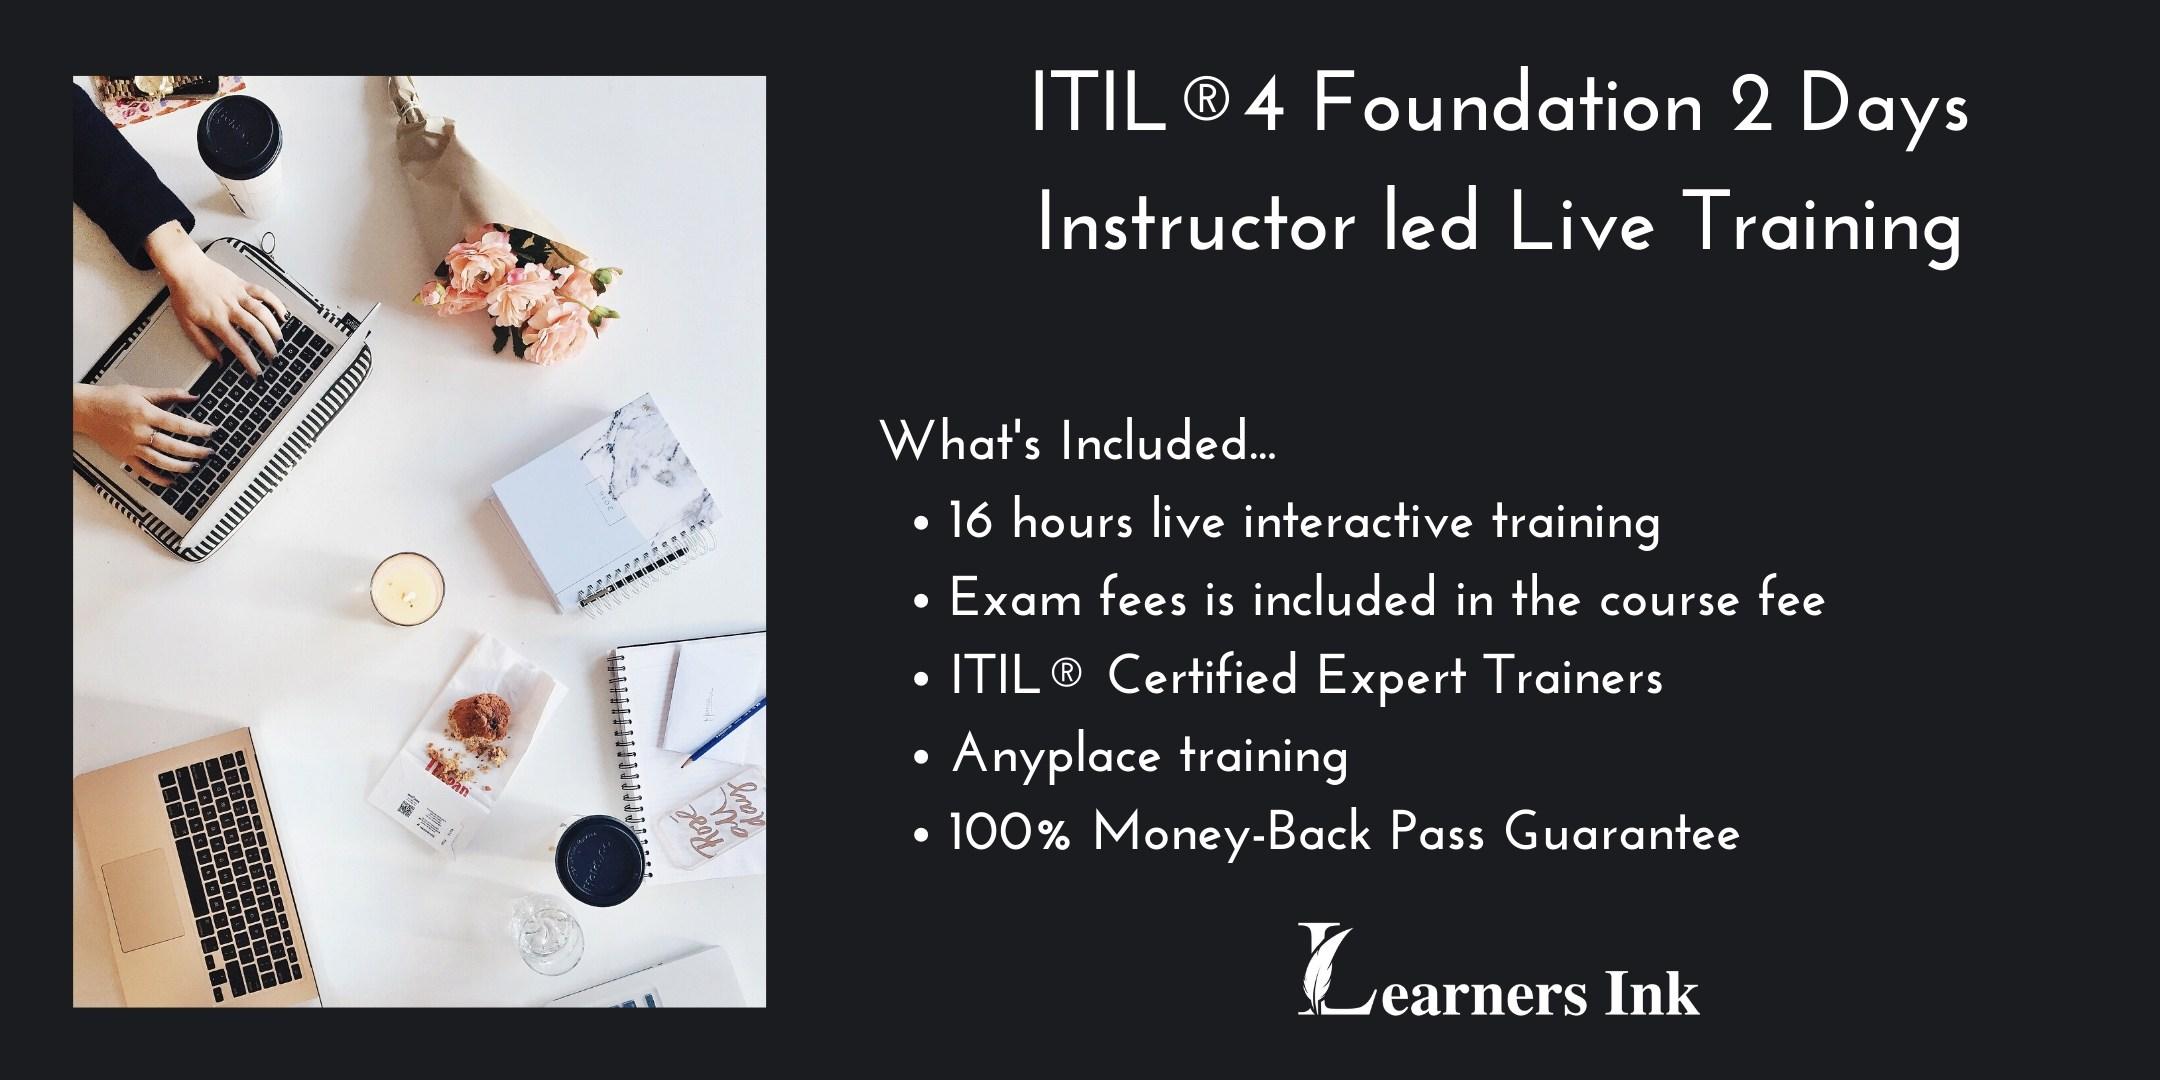 ITIL®4 Foundation 2 Days Certification Training in George Town